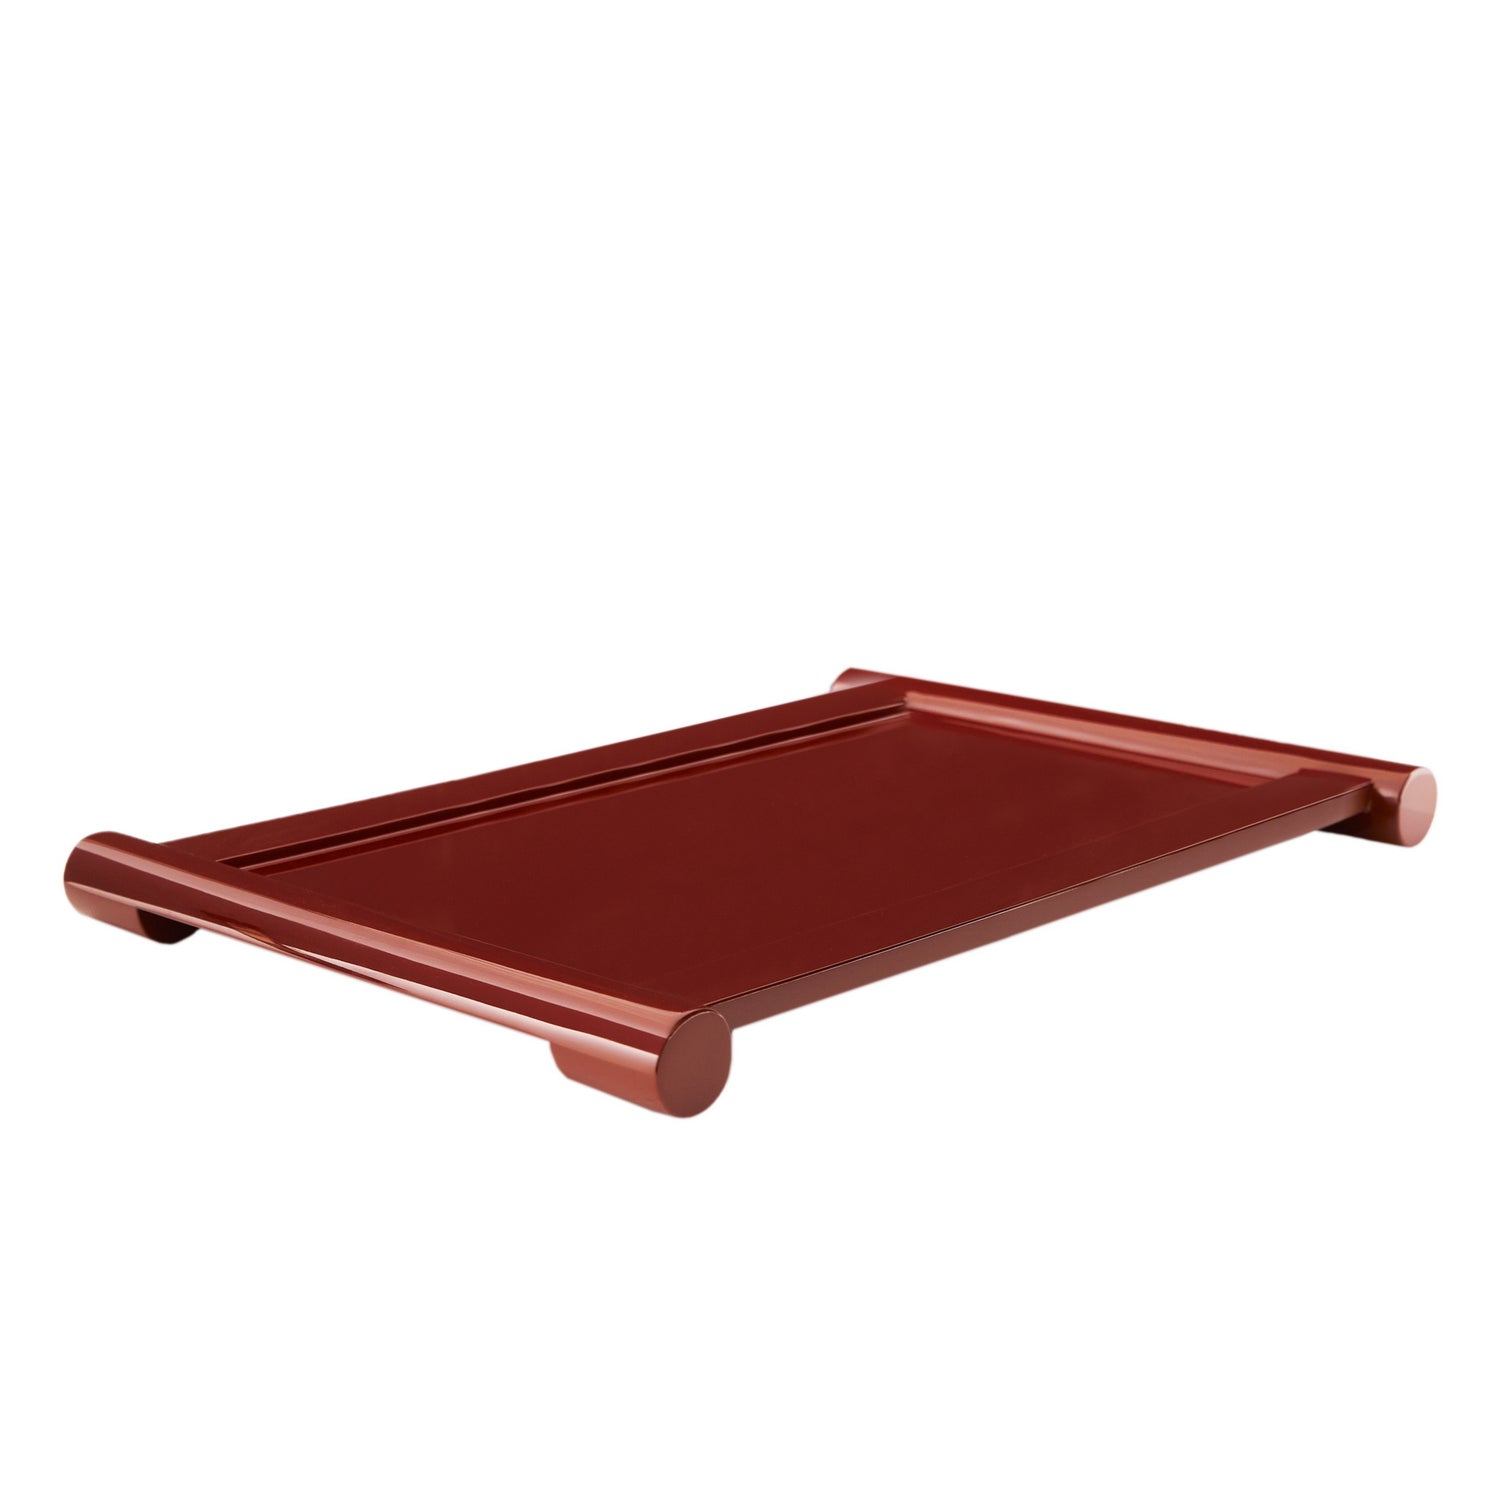 Tray from the Robin collection in Paprika finish